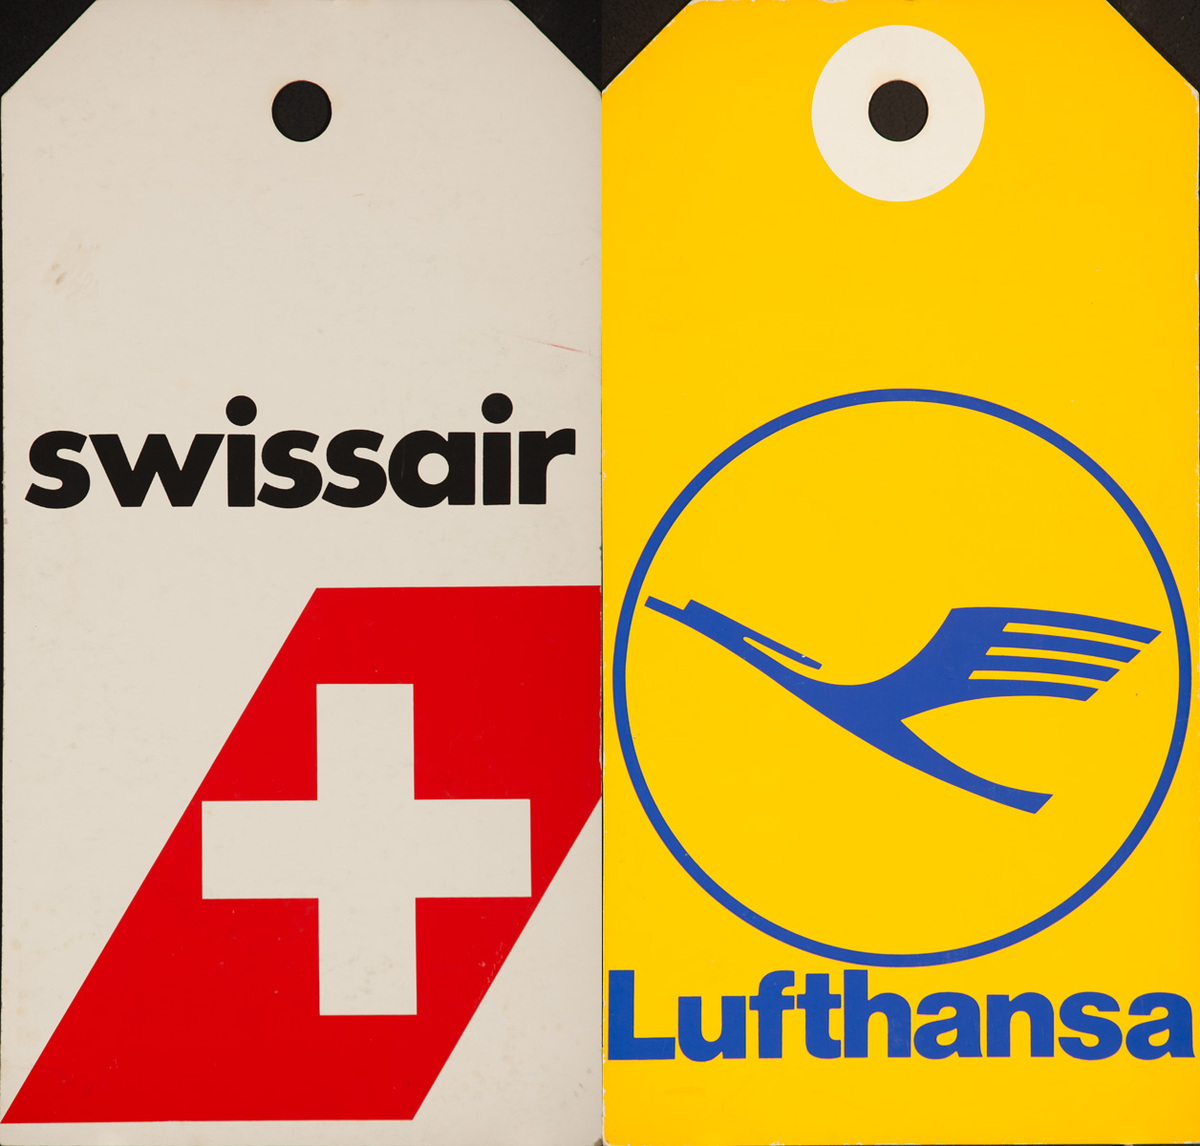 Original 2 Sided Travel Agency Advertising Display Card Poster Swissair and Lufthansa